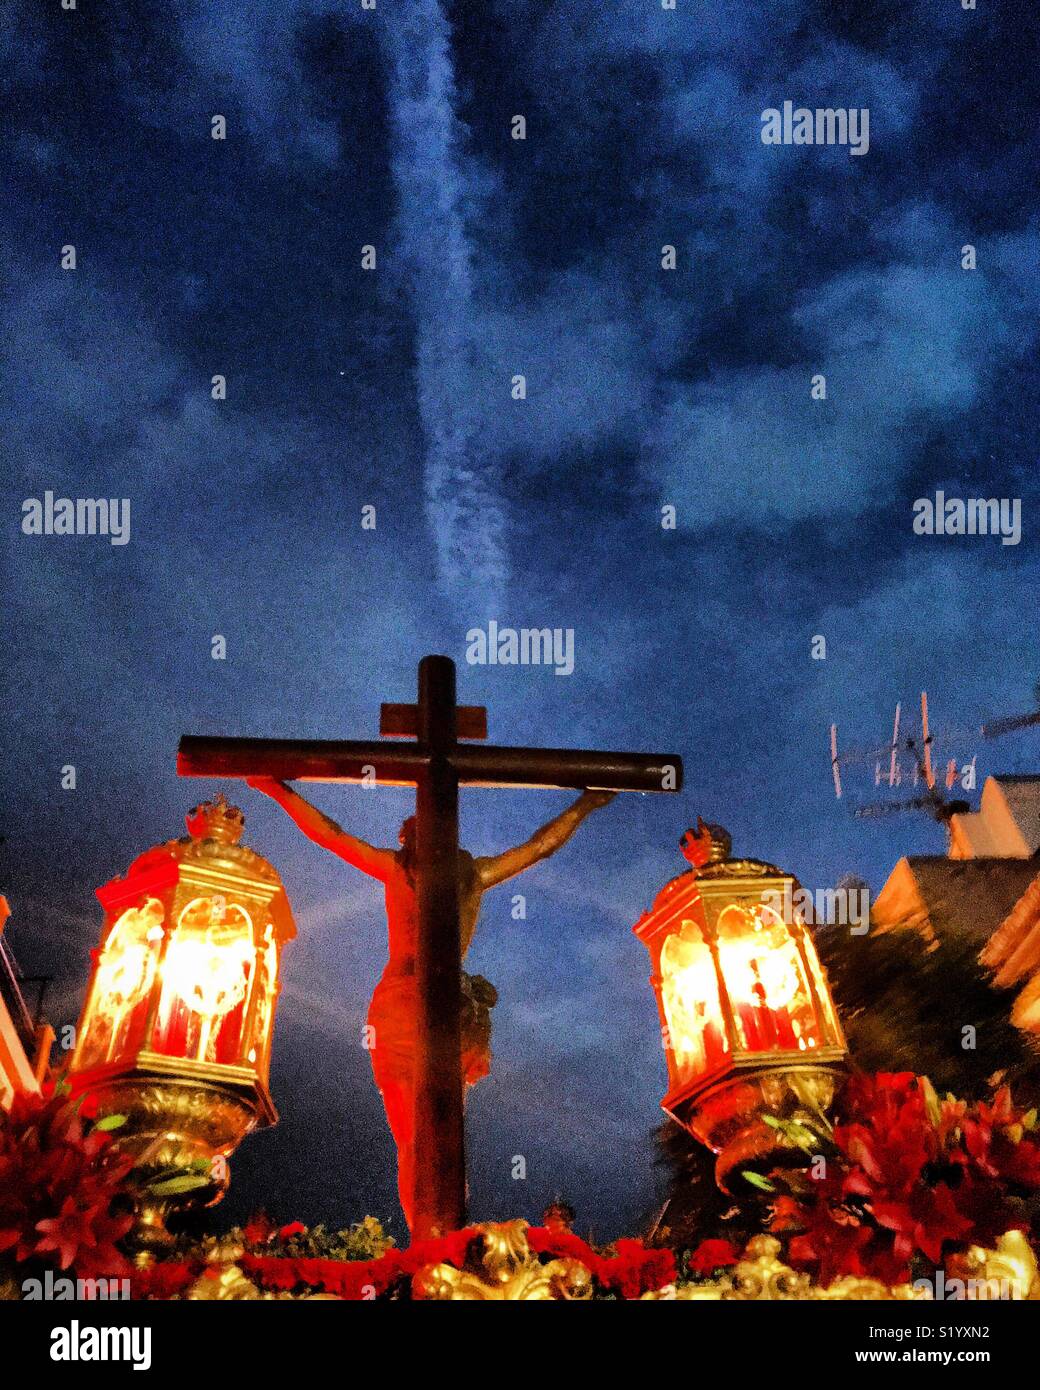 A chemtrail in the sky during a procesion of Jesus Christ crucified at easter holy week in Prado del Rey, Sierra de Cadiz, Andalusia, Spain Stock Photo